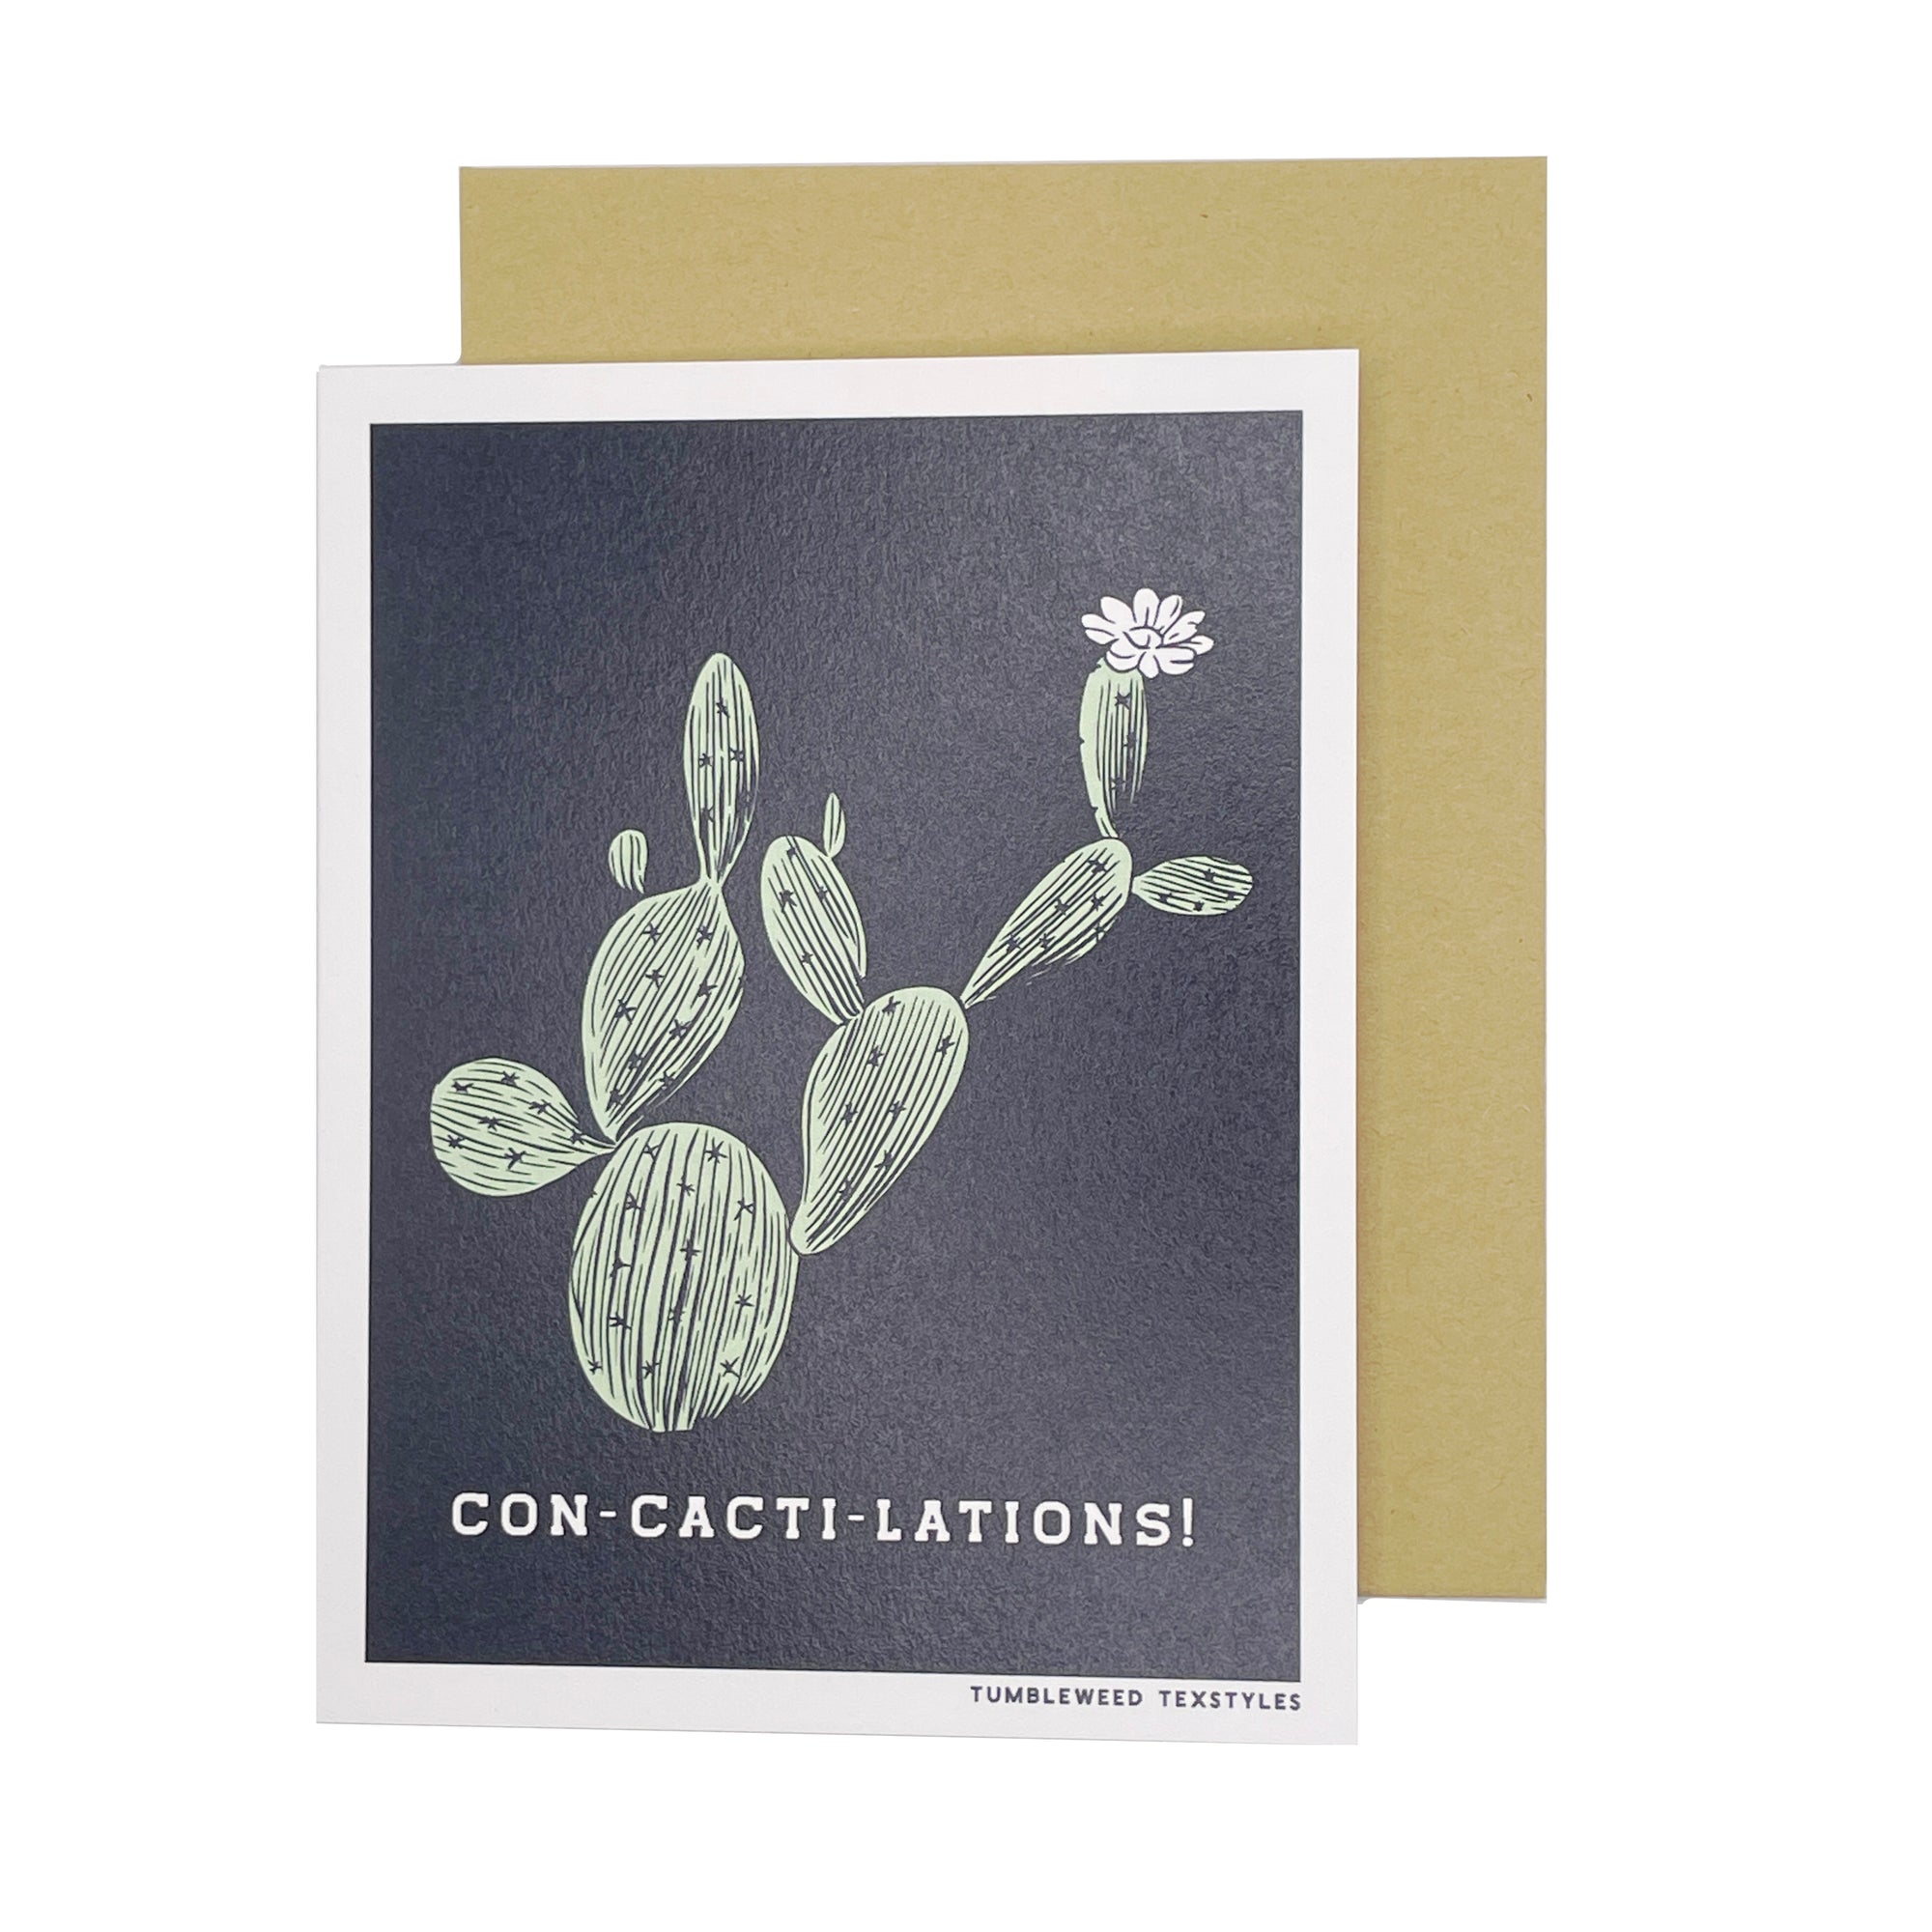 Greeting Card - Con-cacti-lations